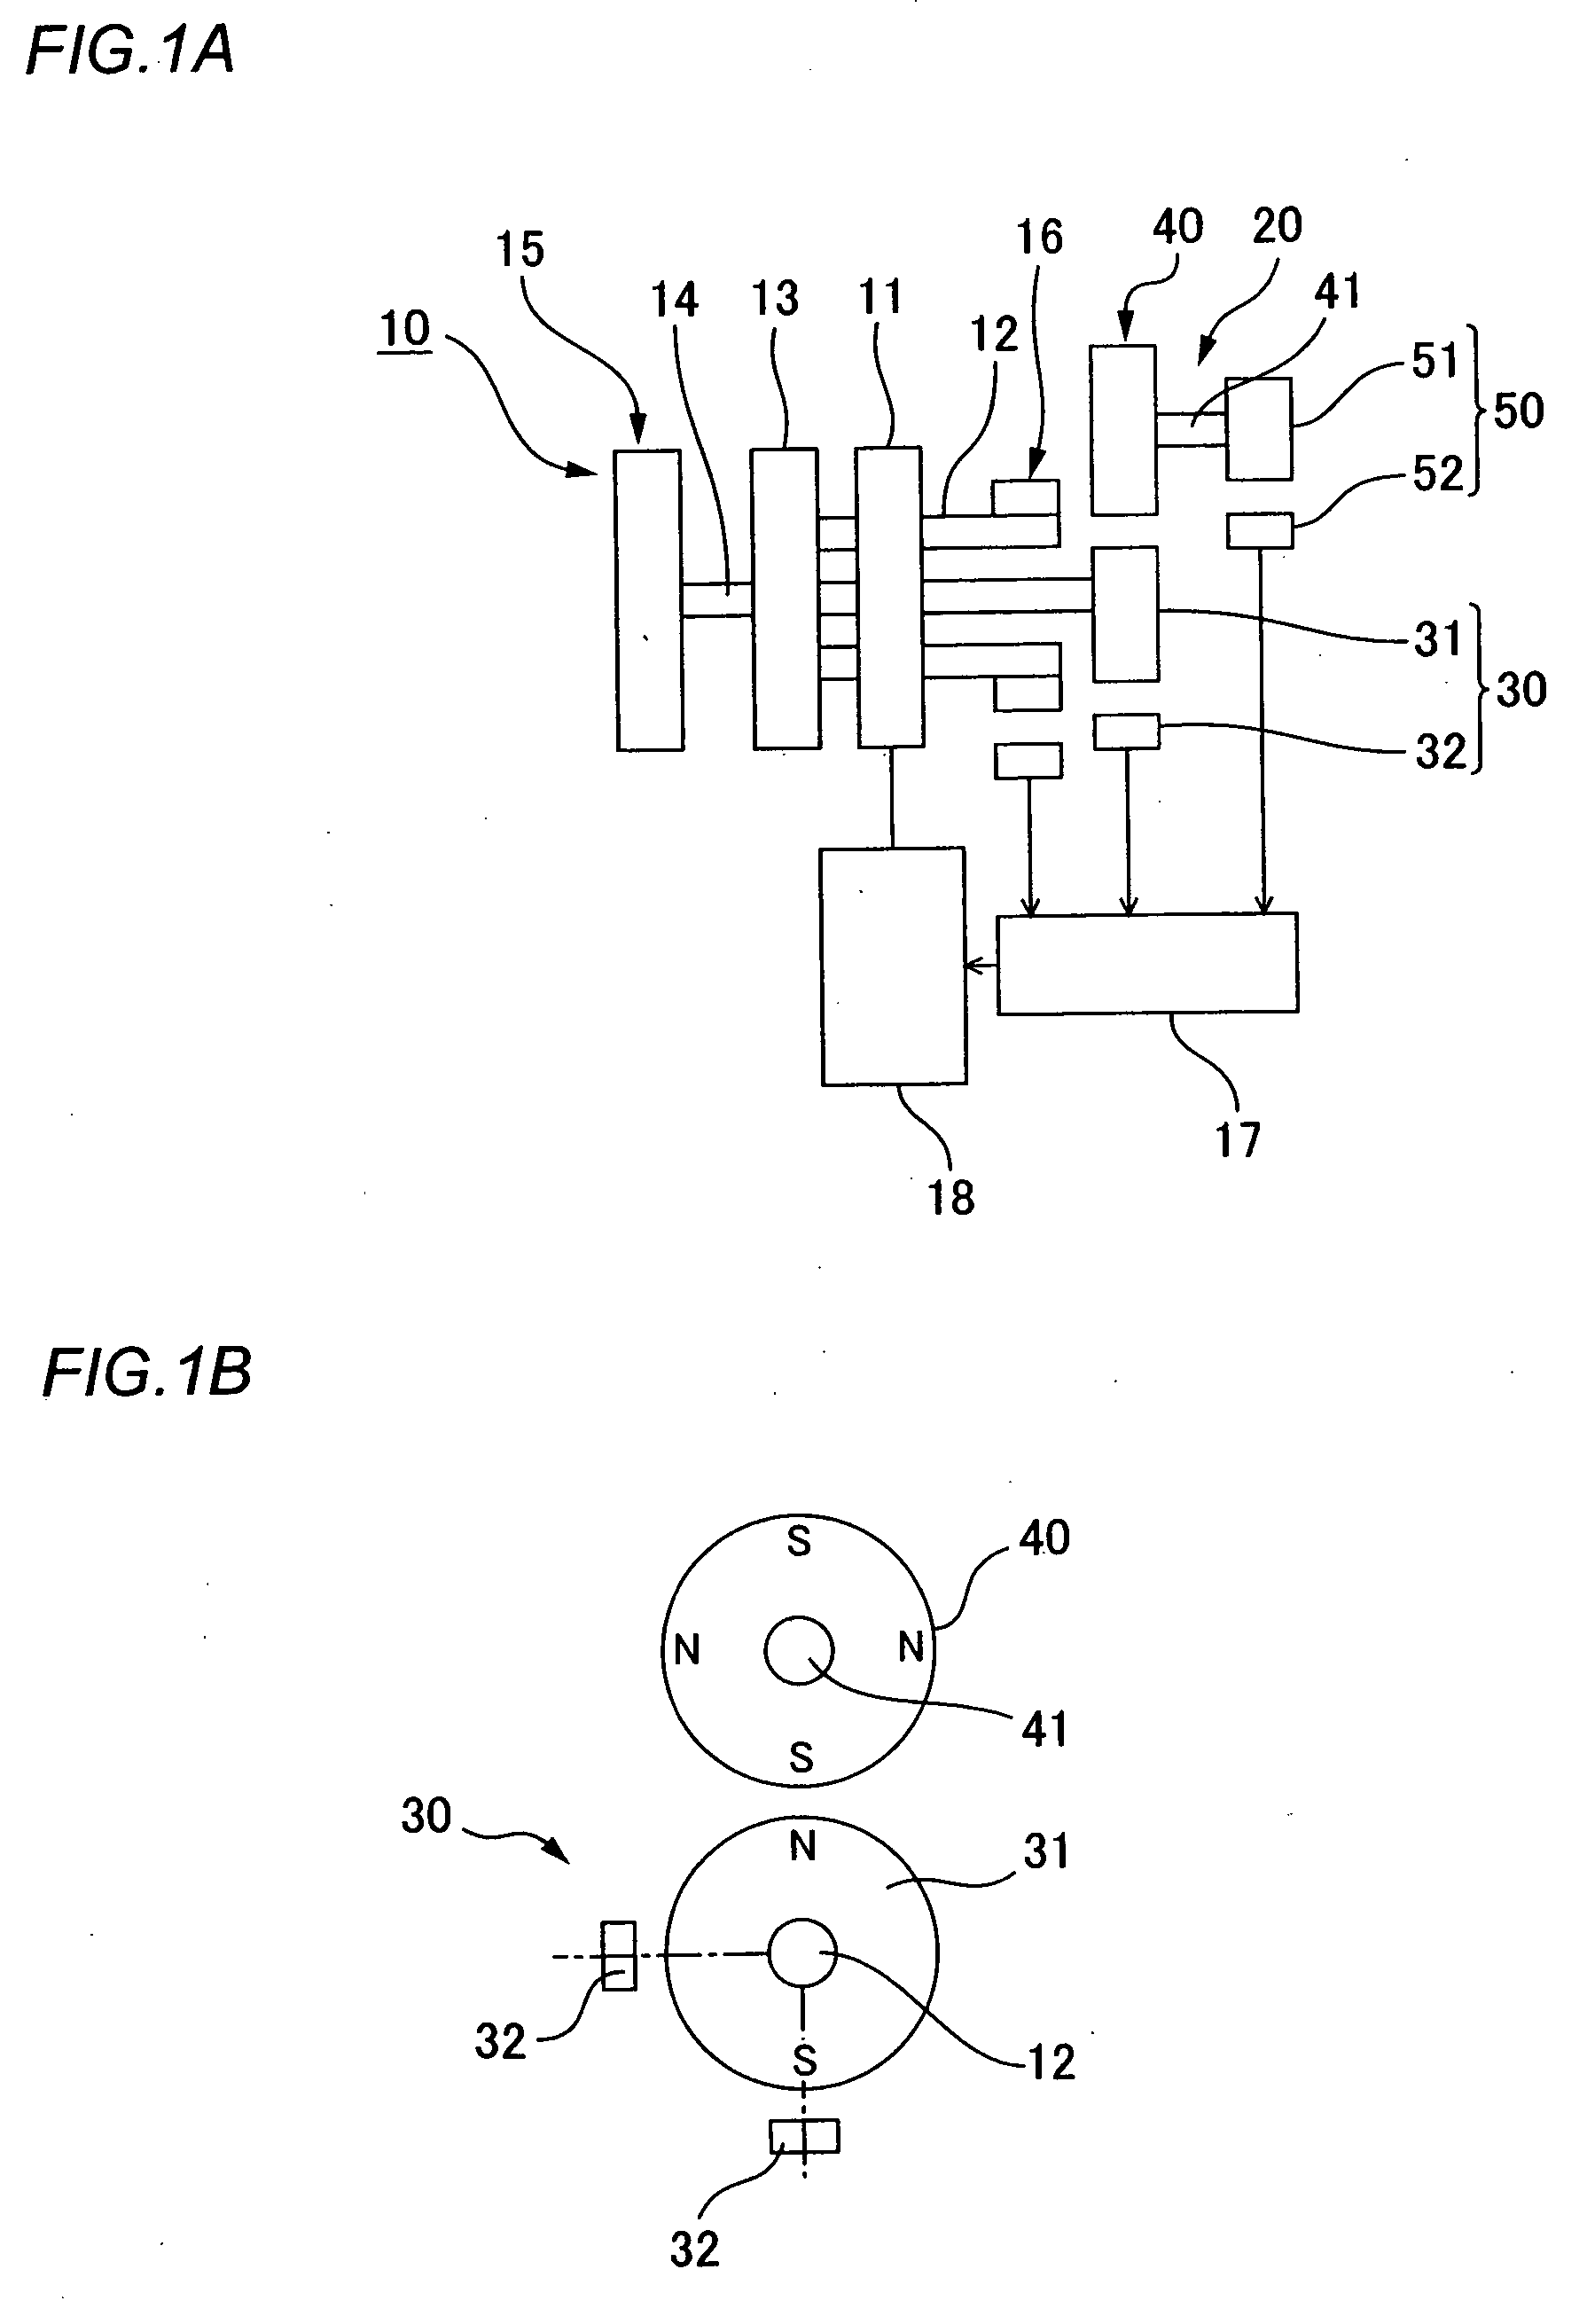 Multiple-Rotation Absolute-Value Encoder of Geared Motor